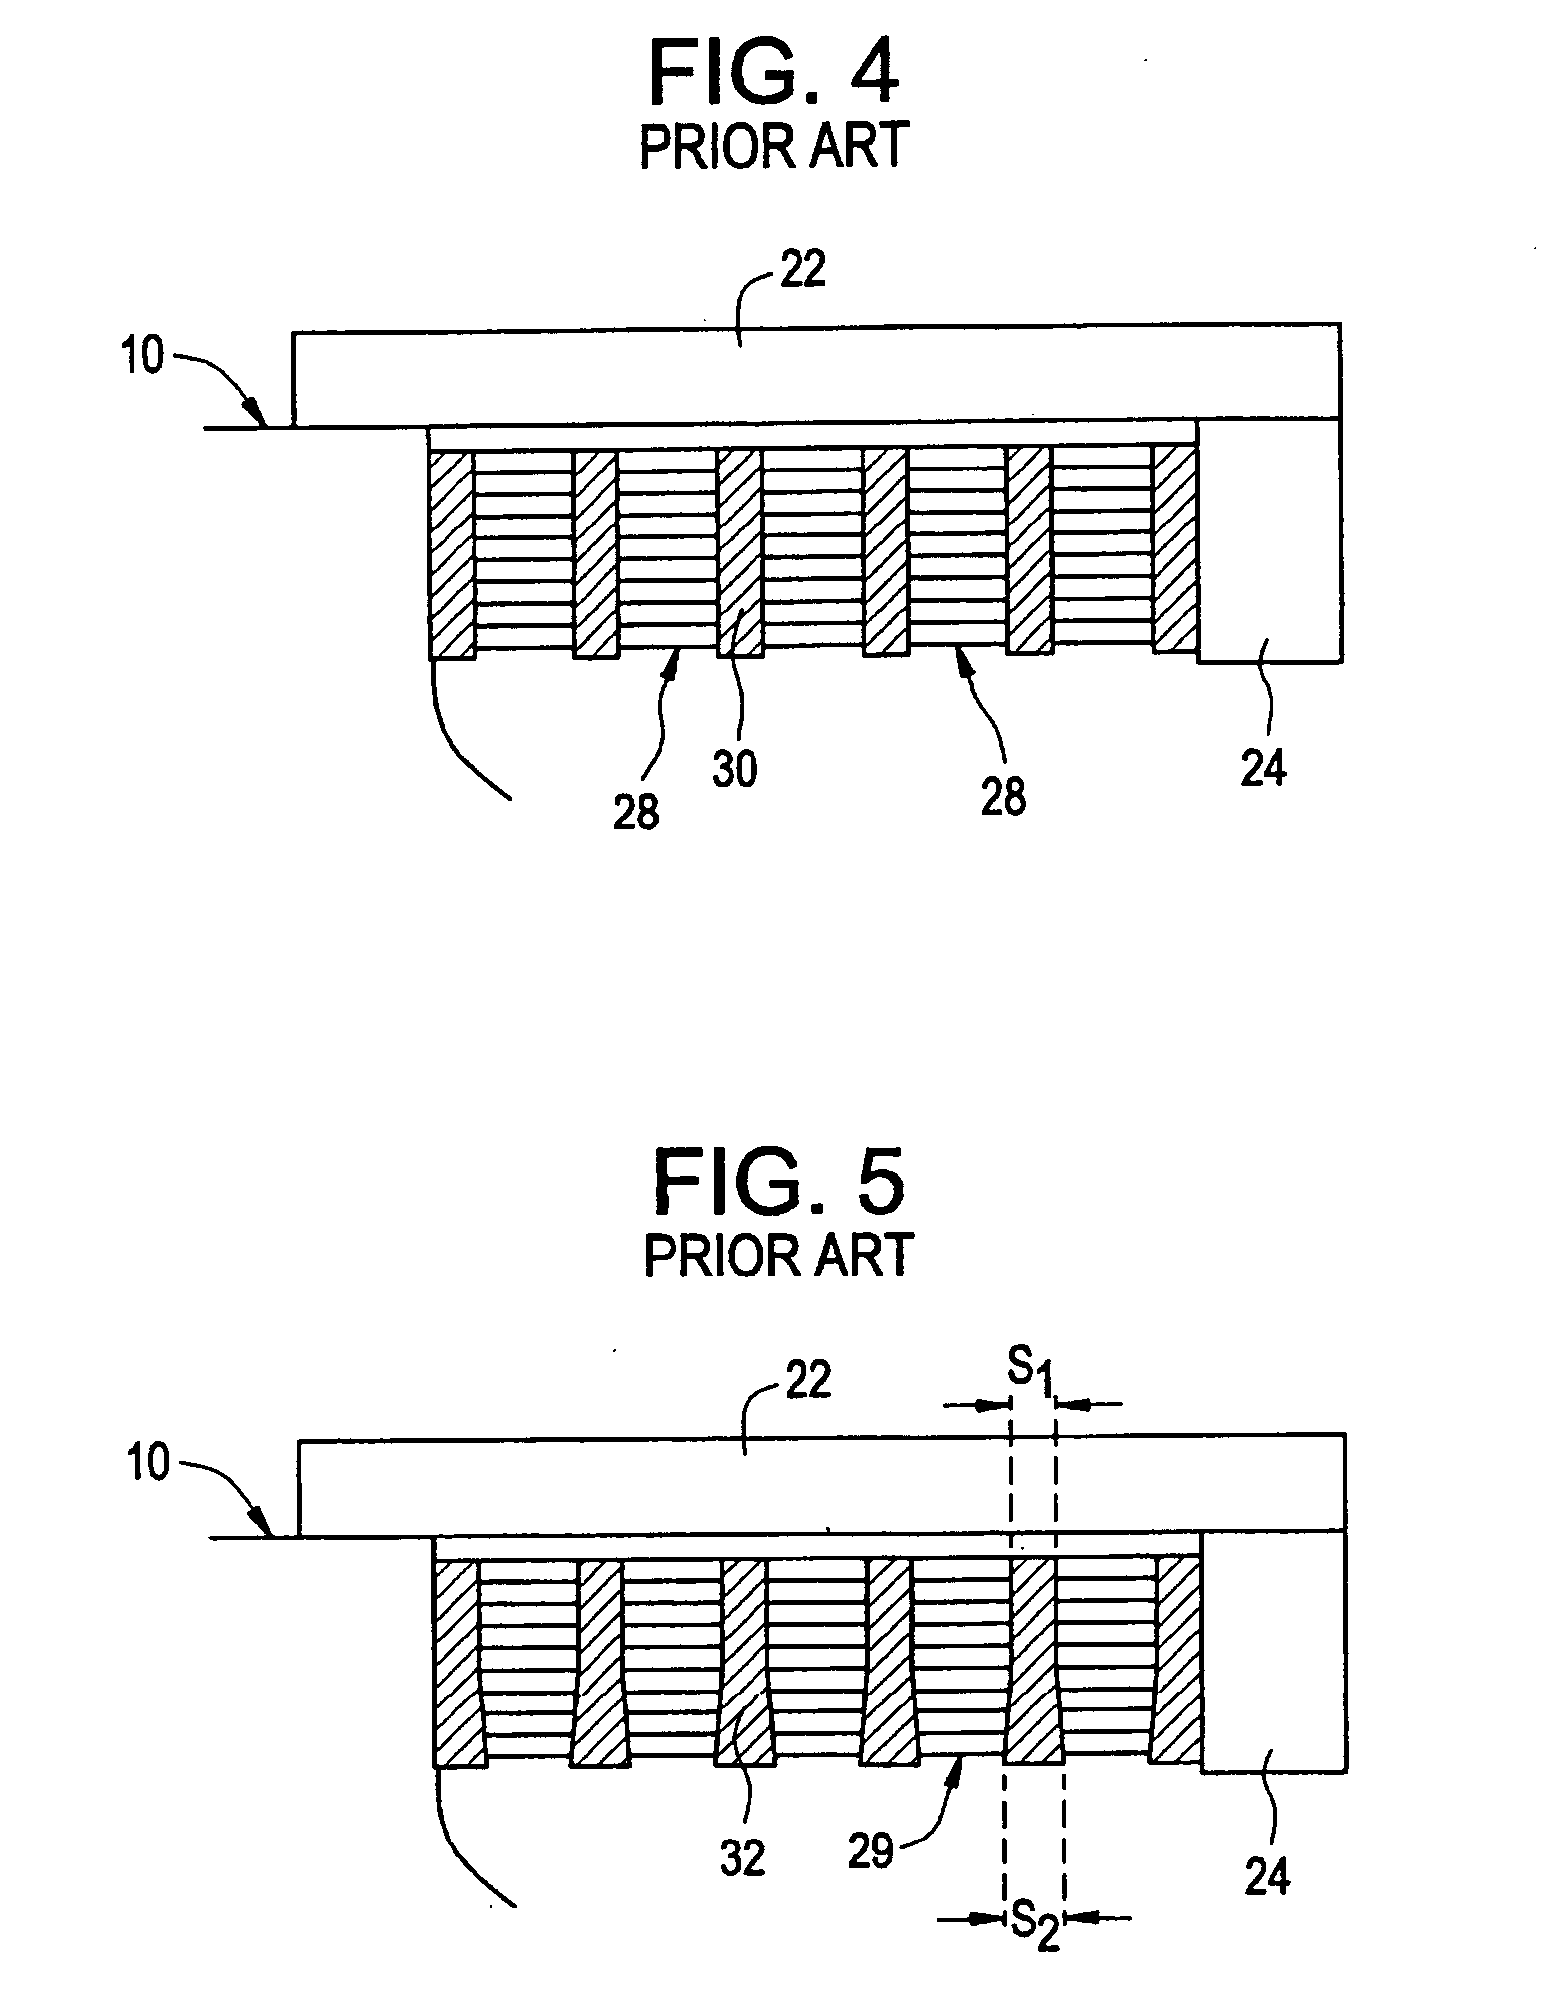 Method and apparatus for reducing hot spot temperatures on stacked field windings